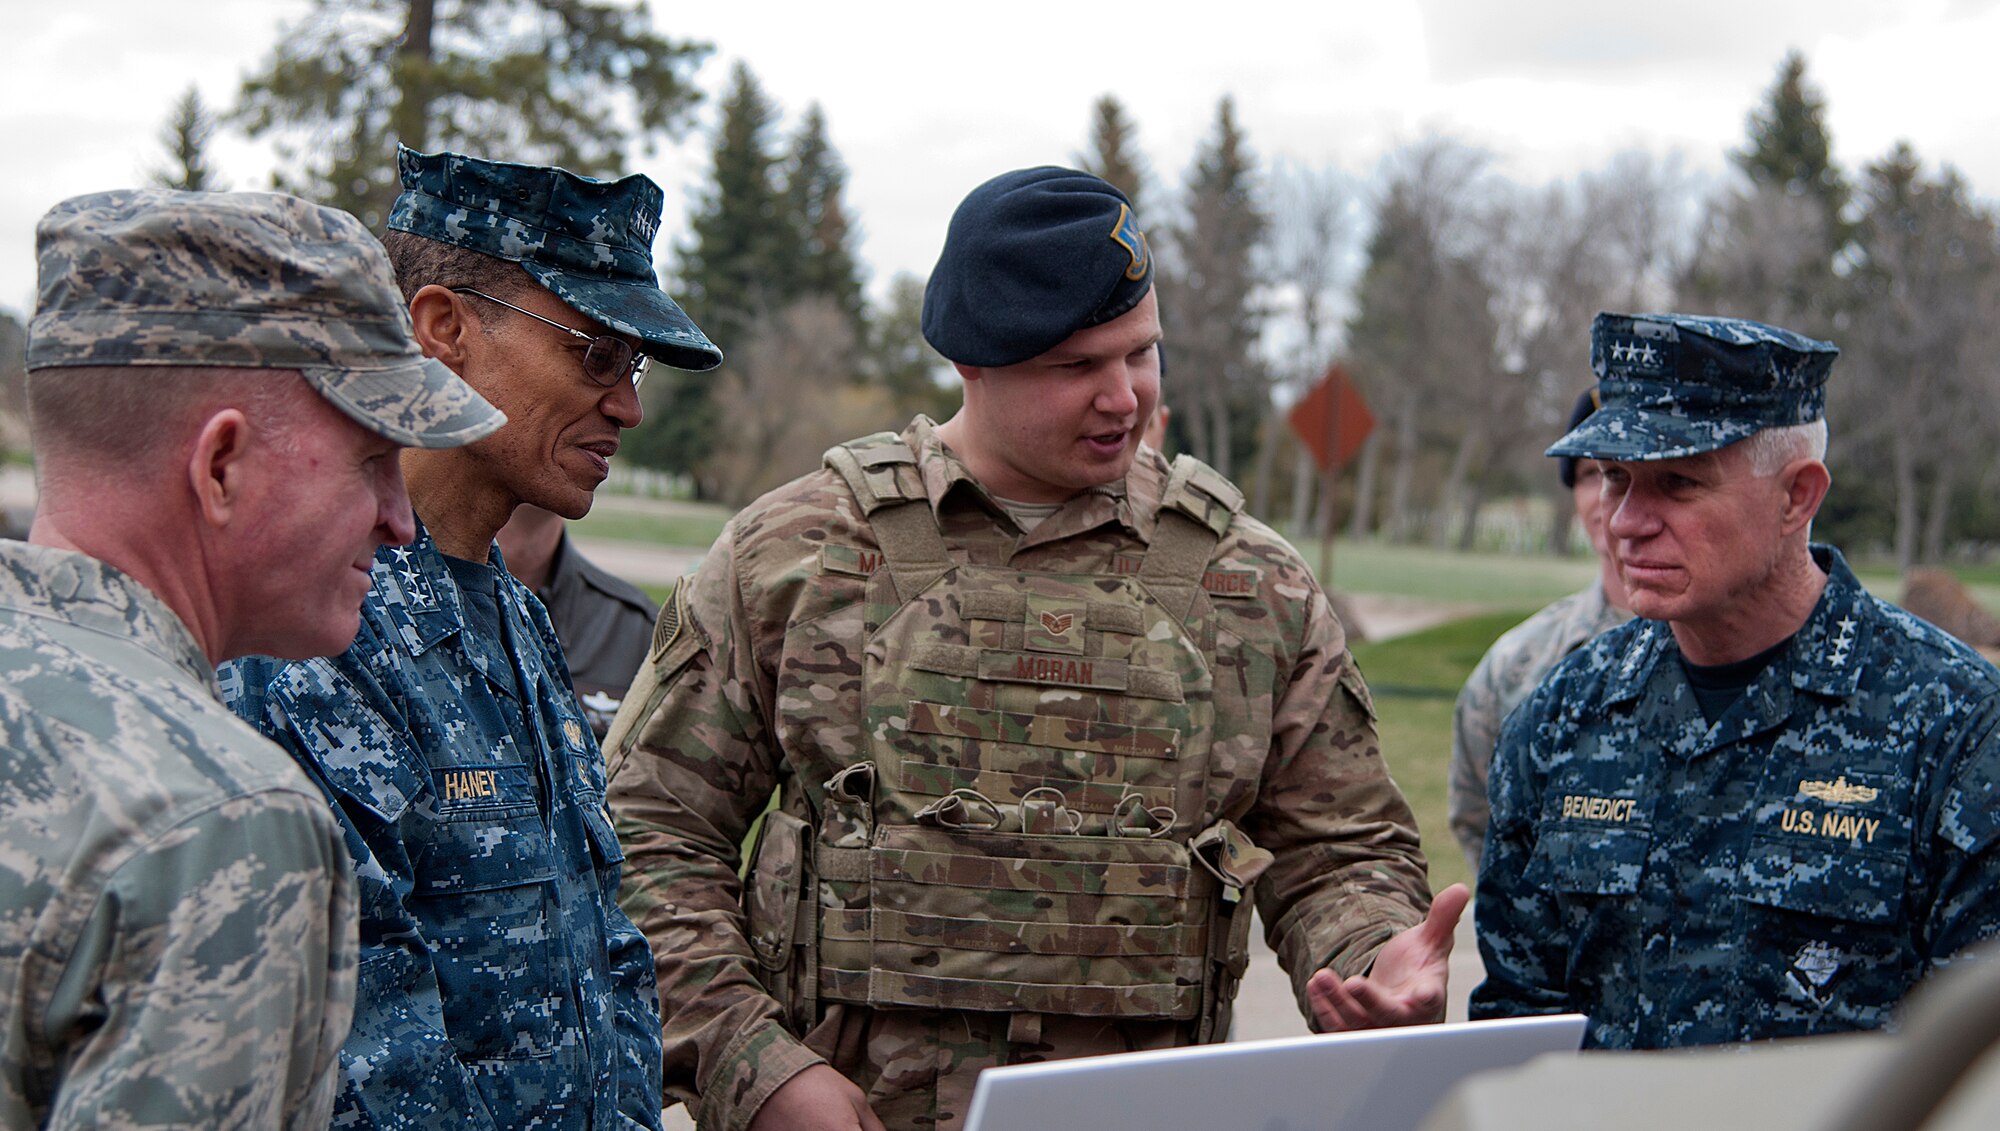 U.S. Air Force Staff Sgt. Sean Moran, 90th Security Forces Support Squadron, briefs U.S. Navy Adm. Cecil D. Haney, U.S. Strategic Command commander; U.S. Air Force Lt. Gen. Stephen W. Wilson, Air Force Global Strike Command commander; and U.S. Navy Vice Adm. Terry Benedict, U.S. Navy Strategic Systems Program director; on a wave relay tactical assault kit radio during a visit to F.E. Warren Air Force Base, Wyo., April 28, 2015. Haney, Wilson and Benedict traveled to F.E. Warren to see firsthand the men and women performing the ICBM mission 24/7, 365, and to attend the Intercontinental Ballistic Missile Stakeholders meeting, one of several such meetings that Haney will chair this year. USSTRATCOM is one of nine DoD unified combatant commands and is charged with strategic deterrence; space operations; cyberspace operations; joint electronic warfare; global strike; missile defense; intelligence, surveillance and reconnaissance; combating weapons of mass destruction; and analysis and targeting. (U.S. Air Force photo by Airman 1st Class Brandon Valle)